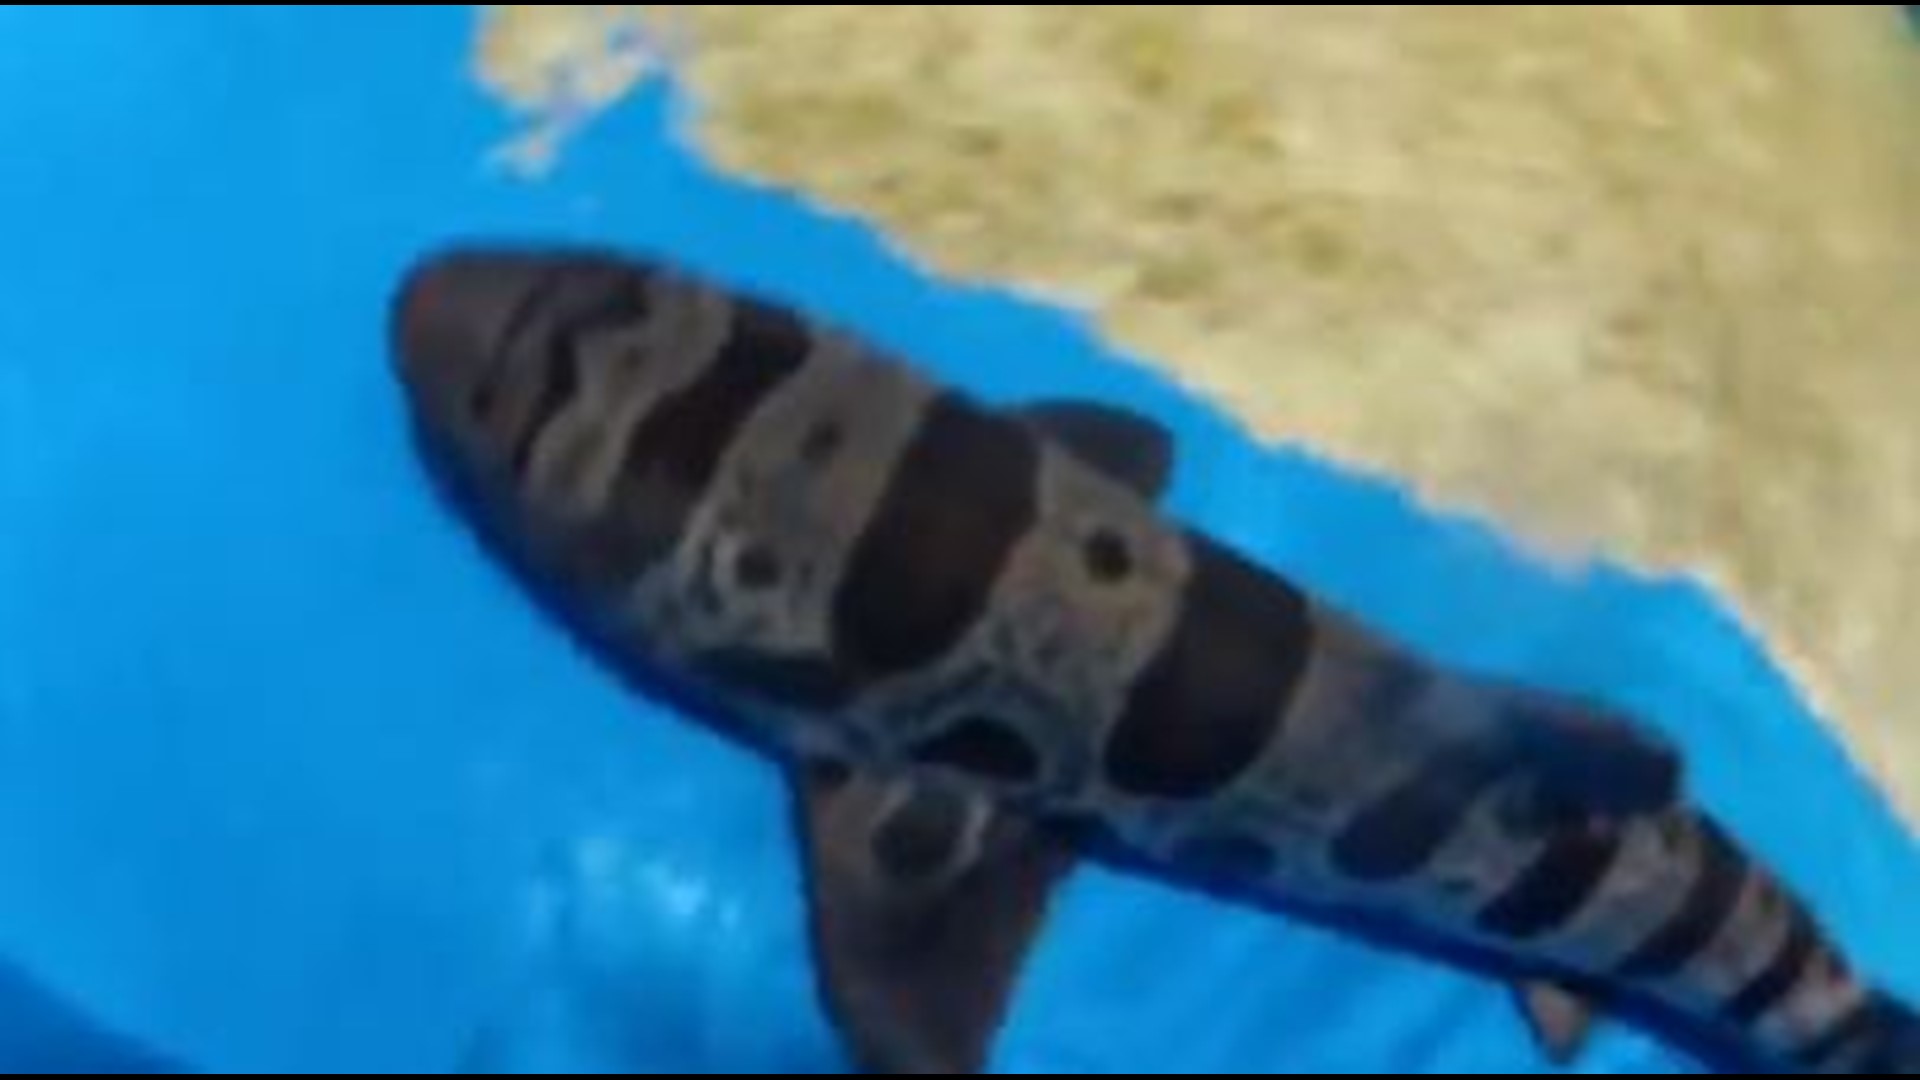 The Newport Aquarium is now home to a new baby shark, on exhibit for the first time now during Shark Summer. Newport Aquarium is located at 1 Levee Way in Newport, KY. For more information, call 1-800-406-3473 or go to NewportAquarium.com.